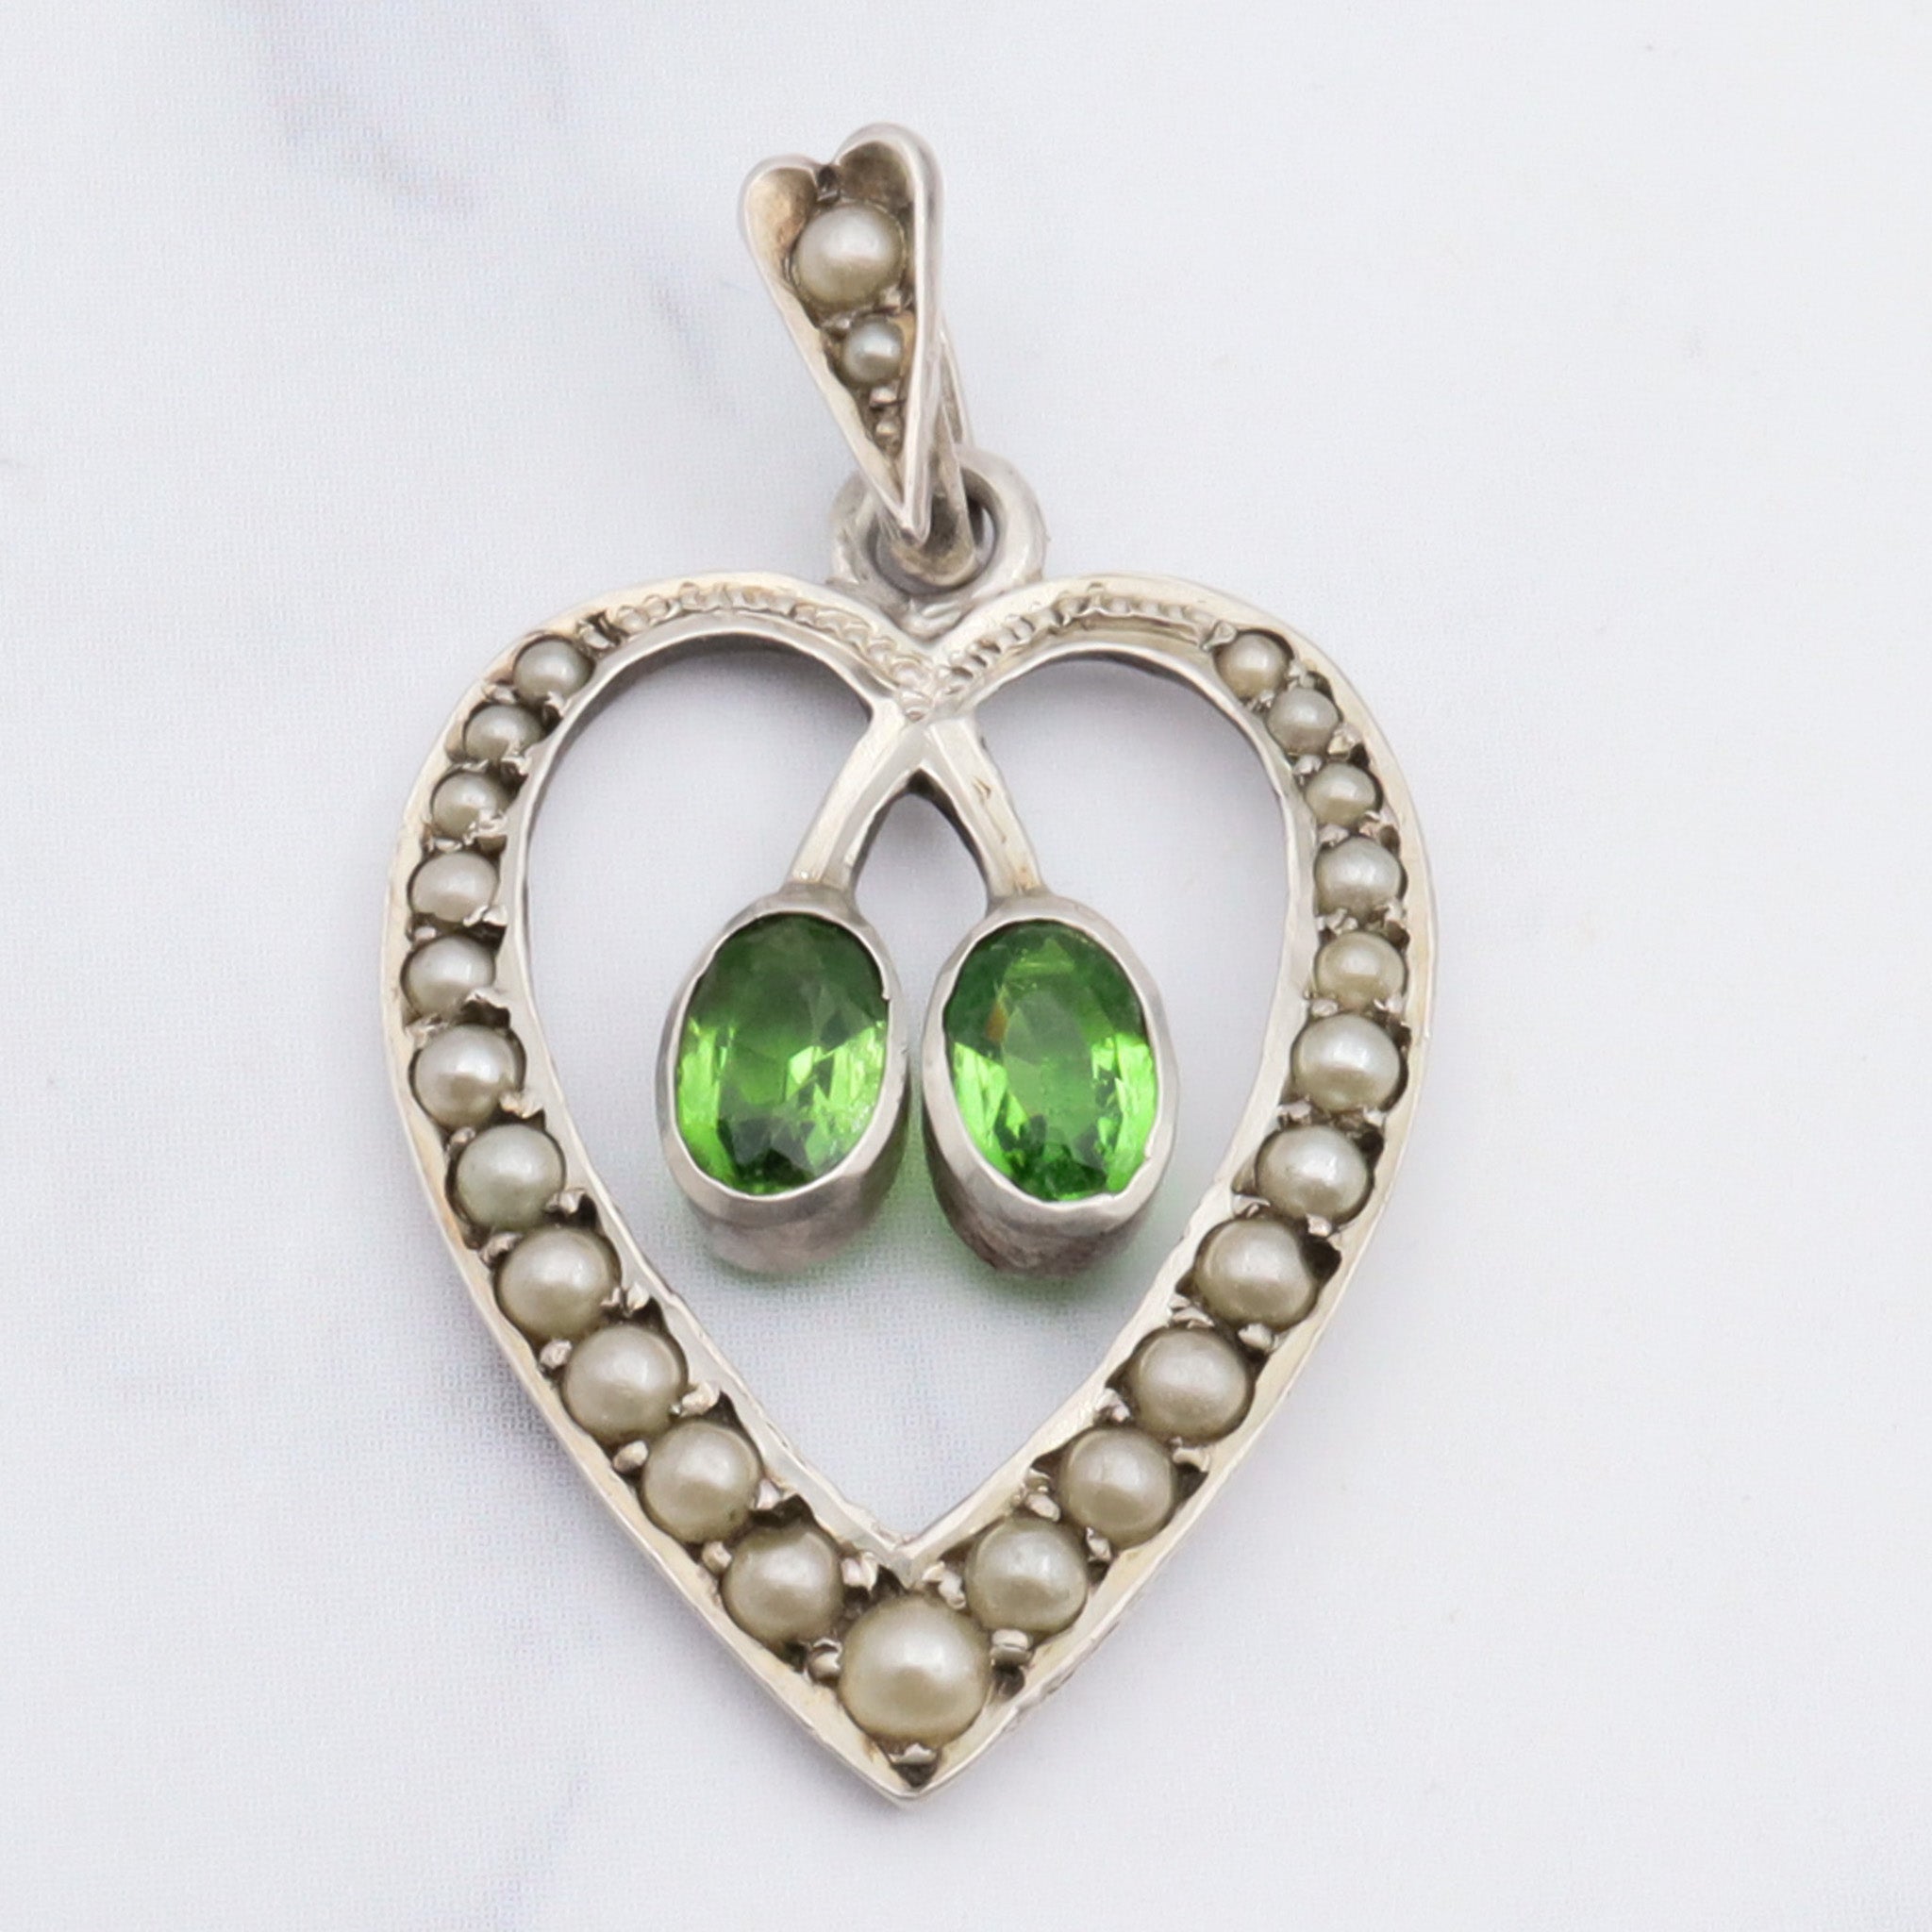 Antique victorian german 935 silver green paste and split pearl heart pendant